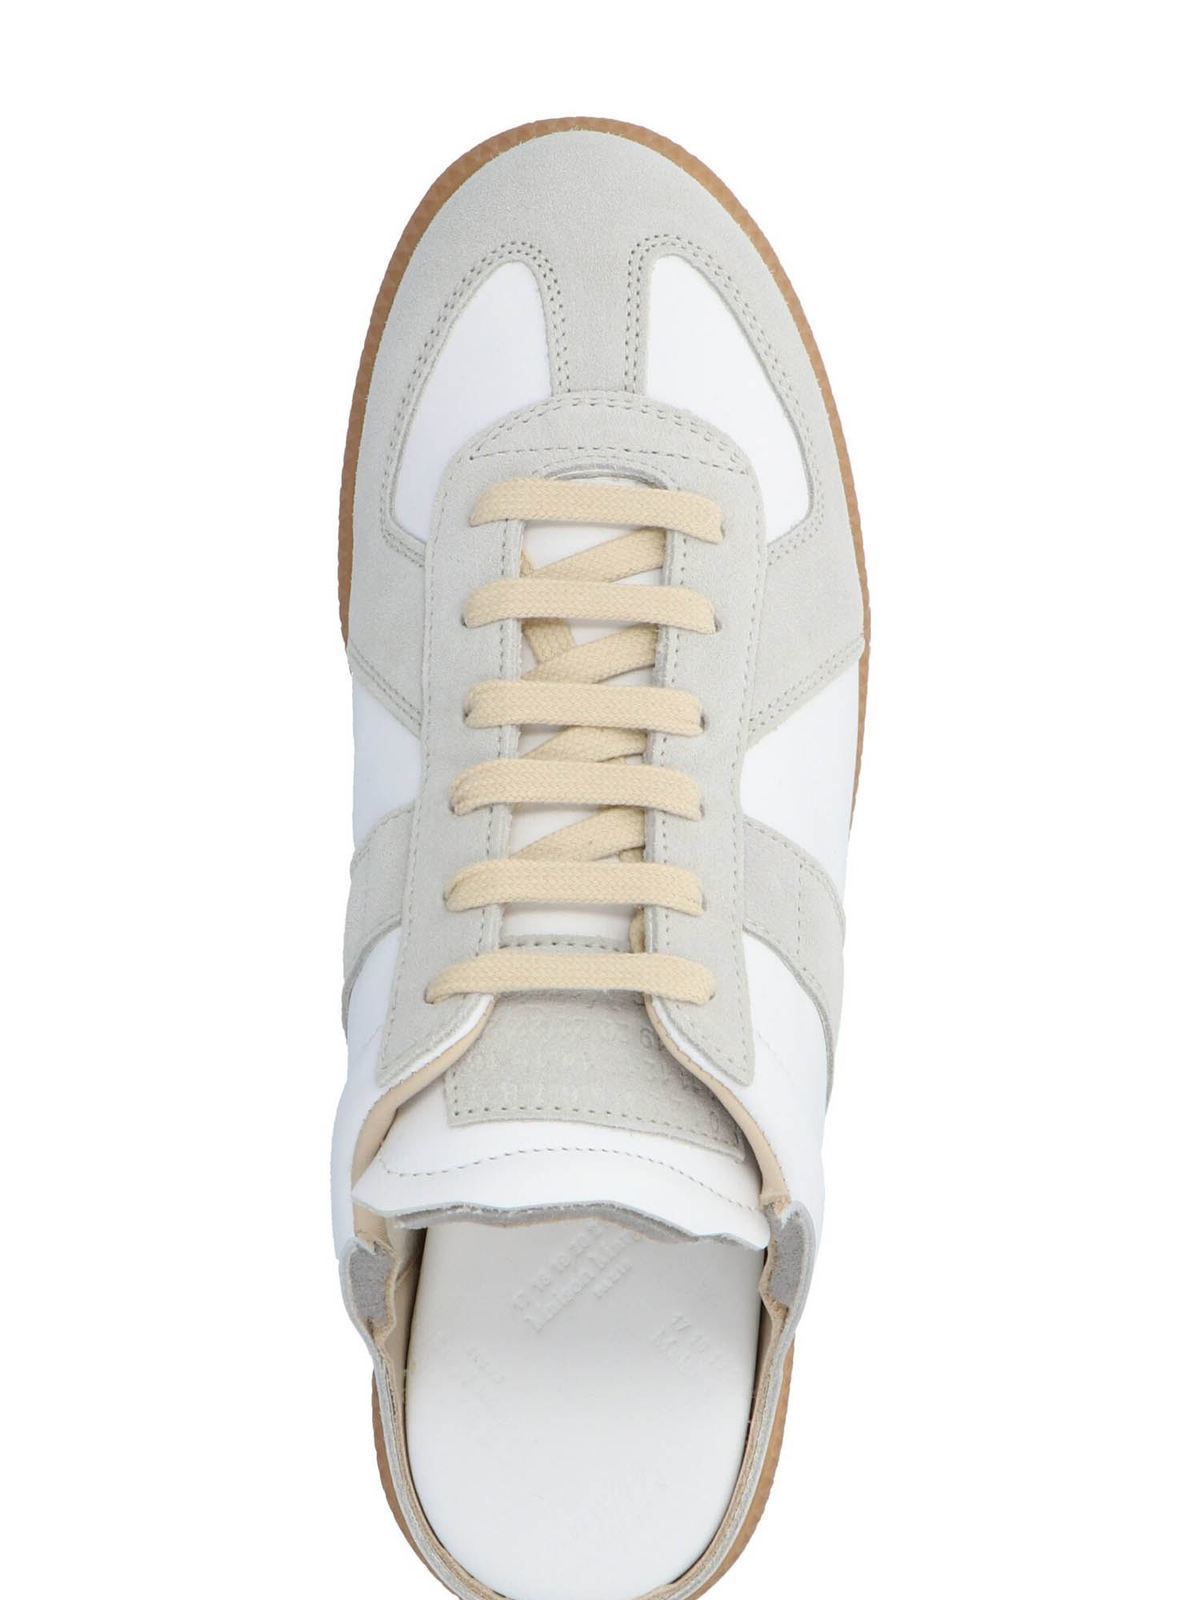 Trainers Maison Margiela - Open on the back Replica sneakers in white ...